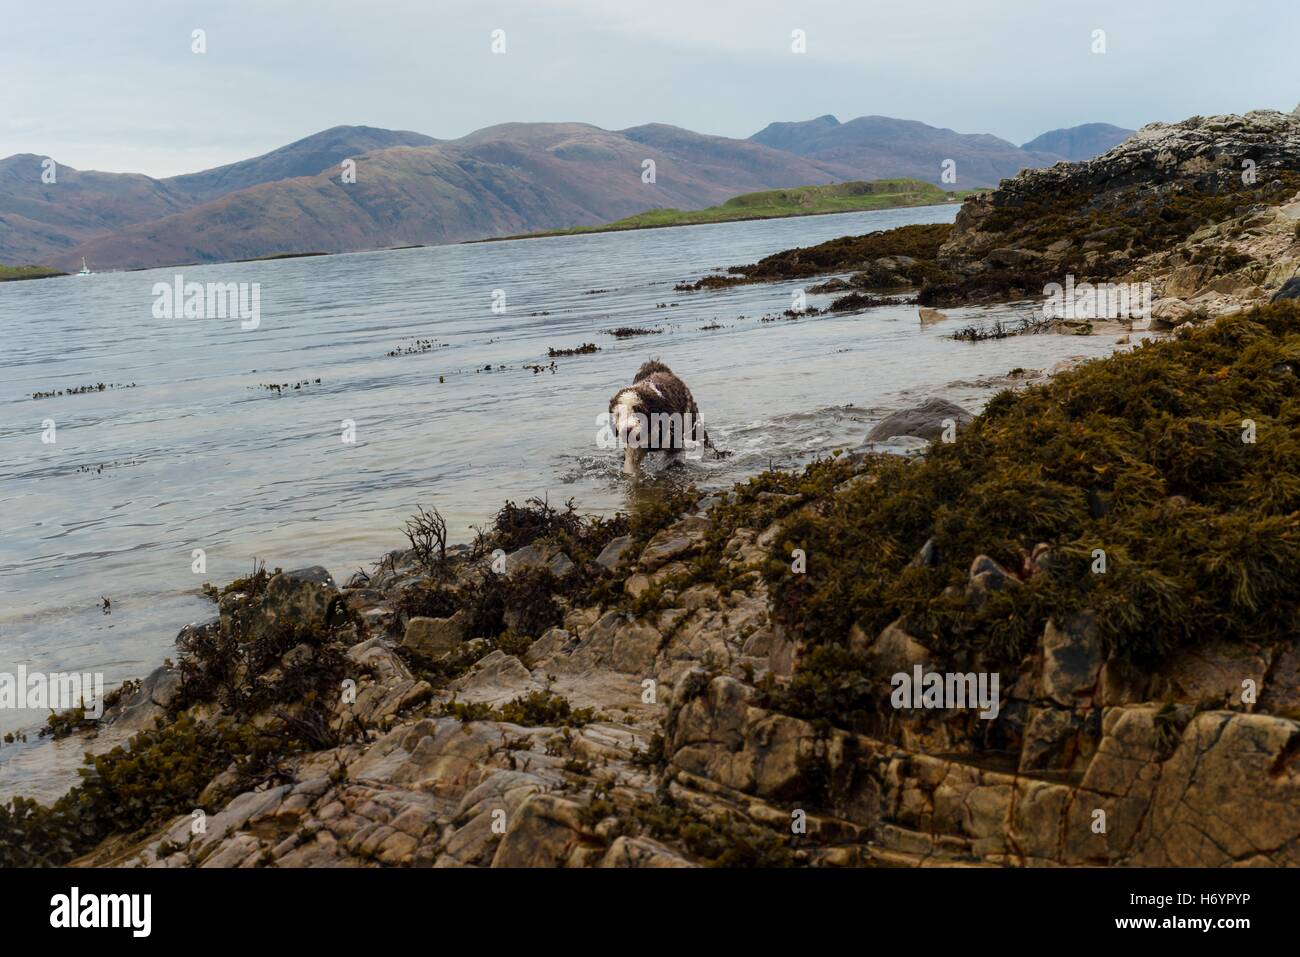 Spanish Water Dog playing near loch at port appin Scotland, scenic mountains Stock Photo